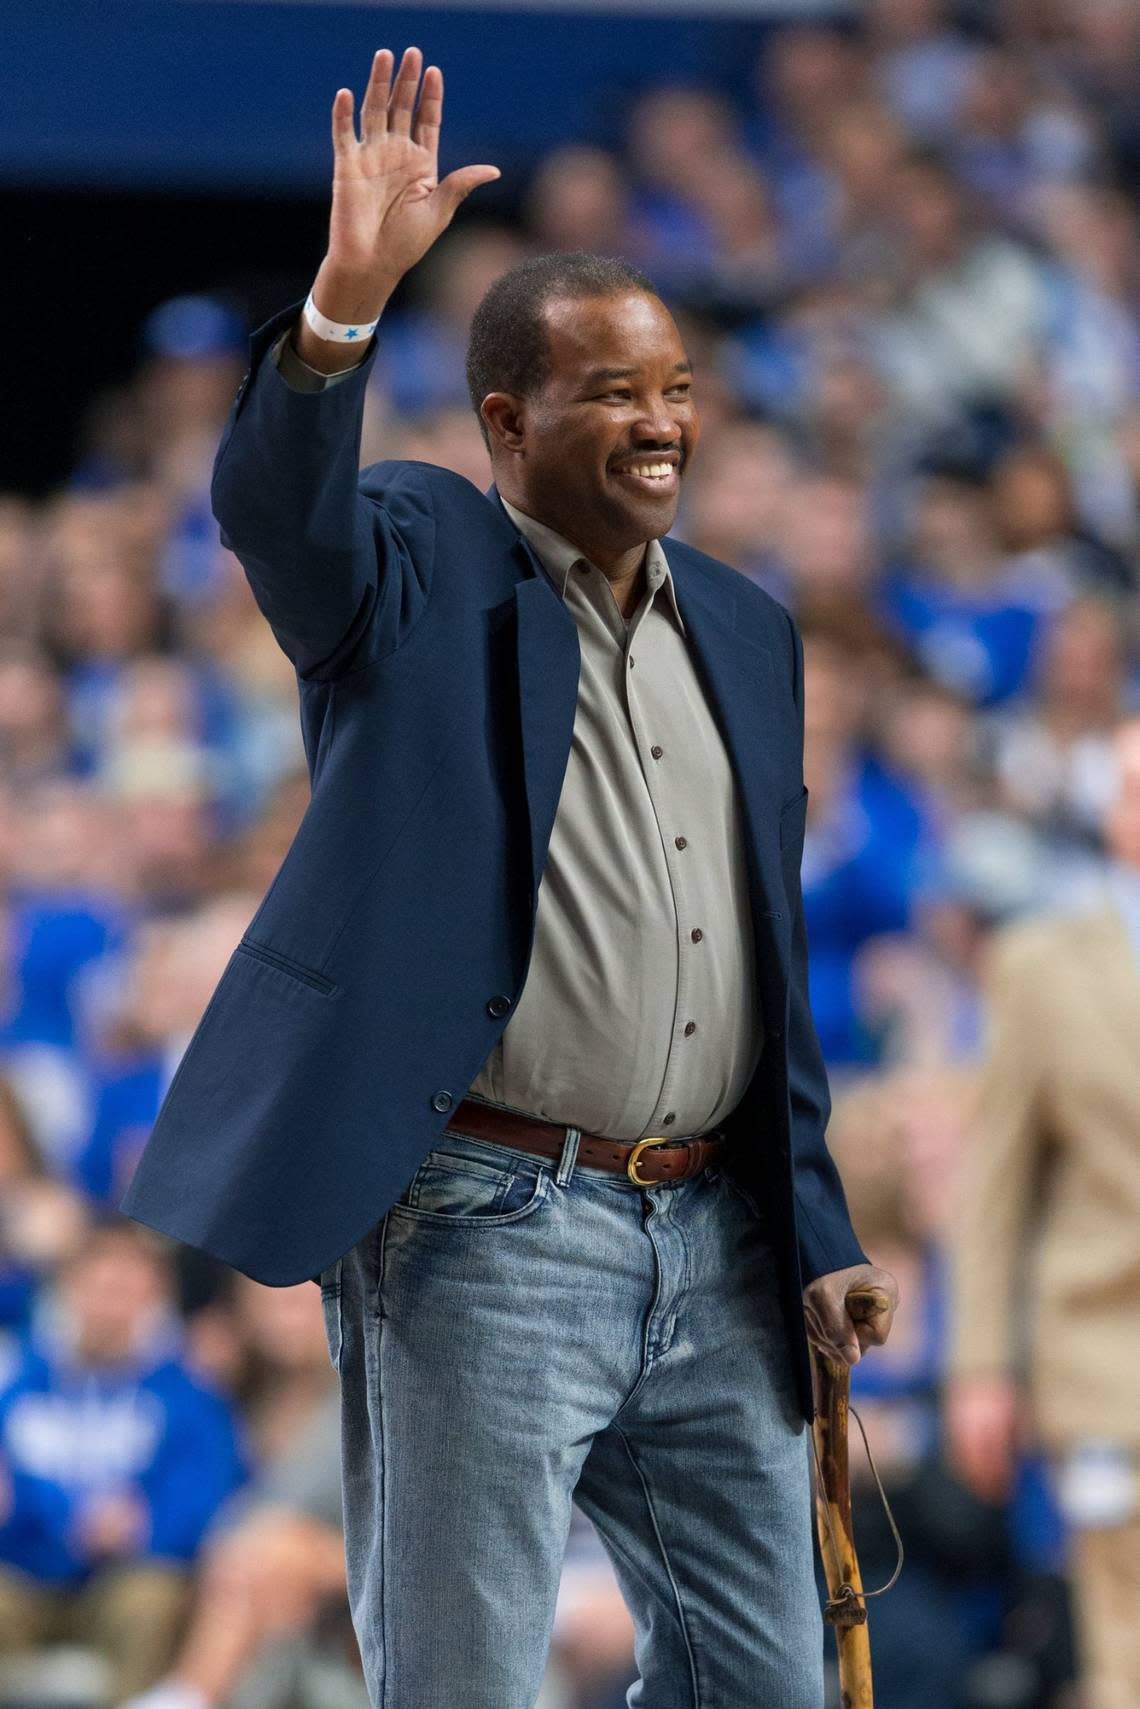 Reggie Warford, who was an assistant coach at Pittsburgh, Iowa State and Long Beach State after his playing days at Kentucky, waves to the Rupp Arena crowd during a UK game in 2016.